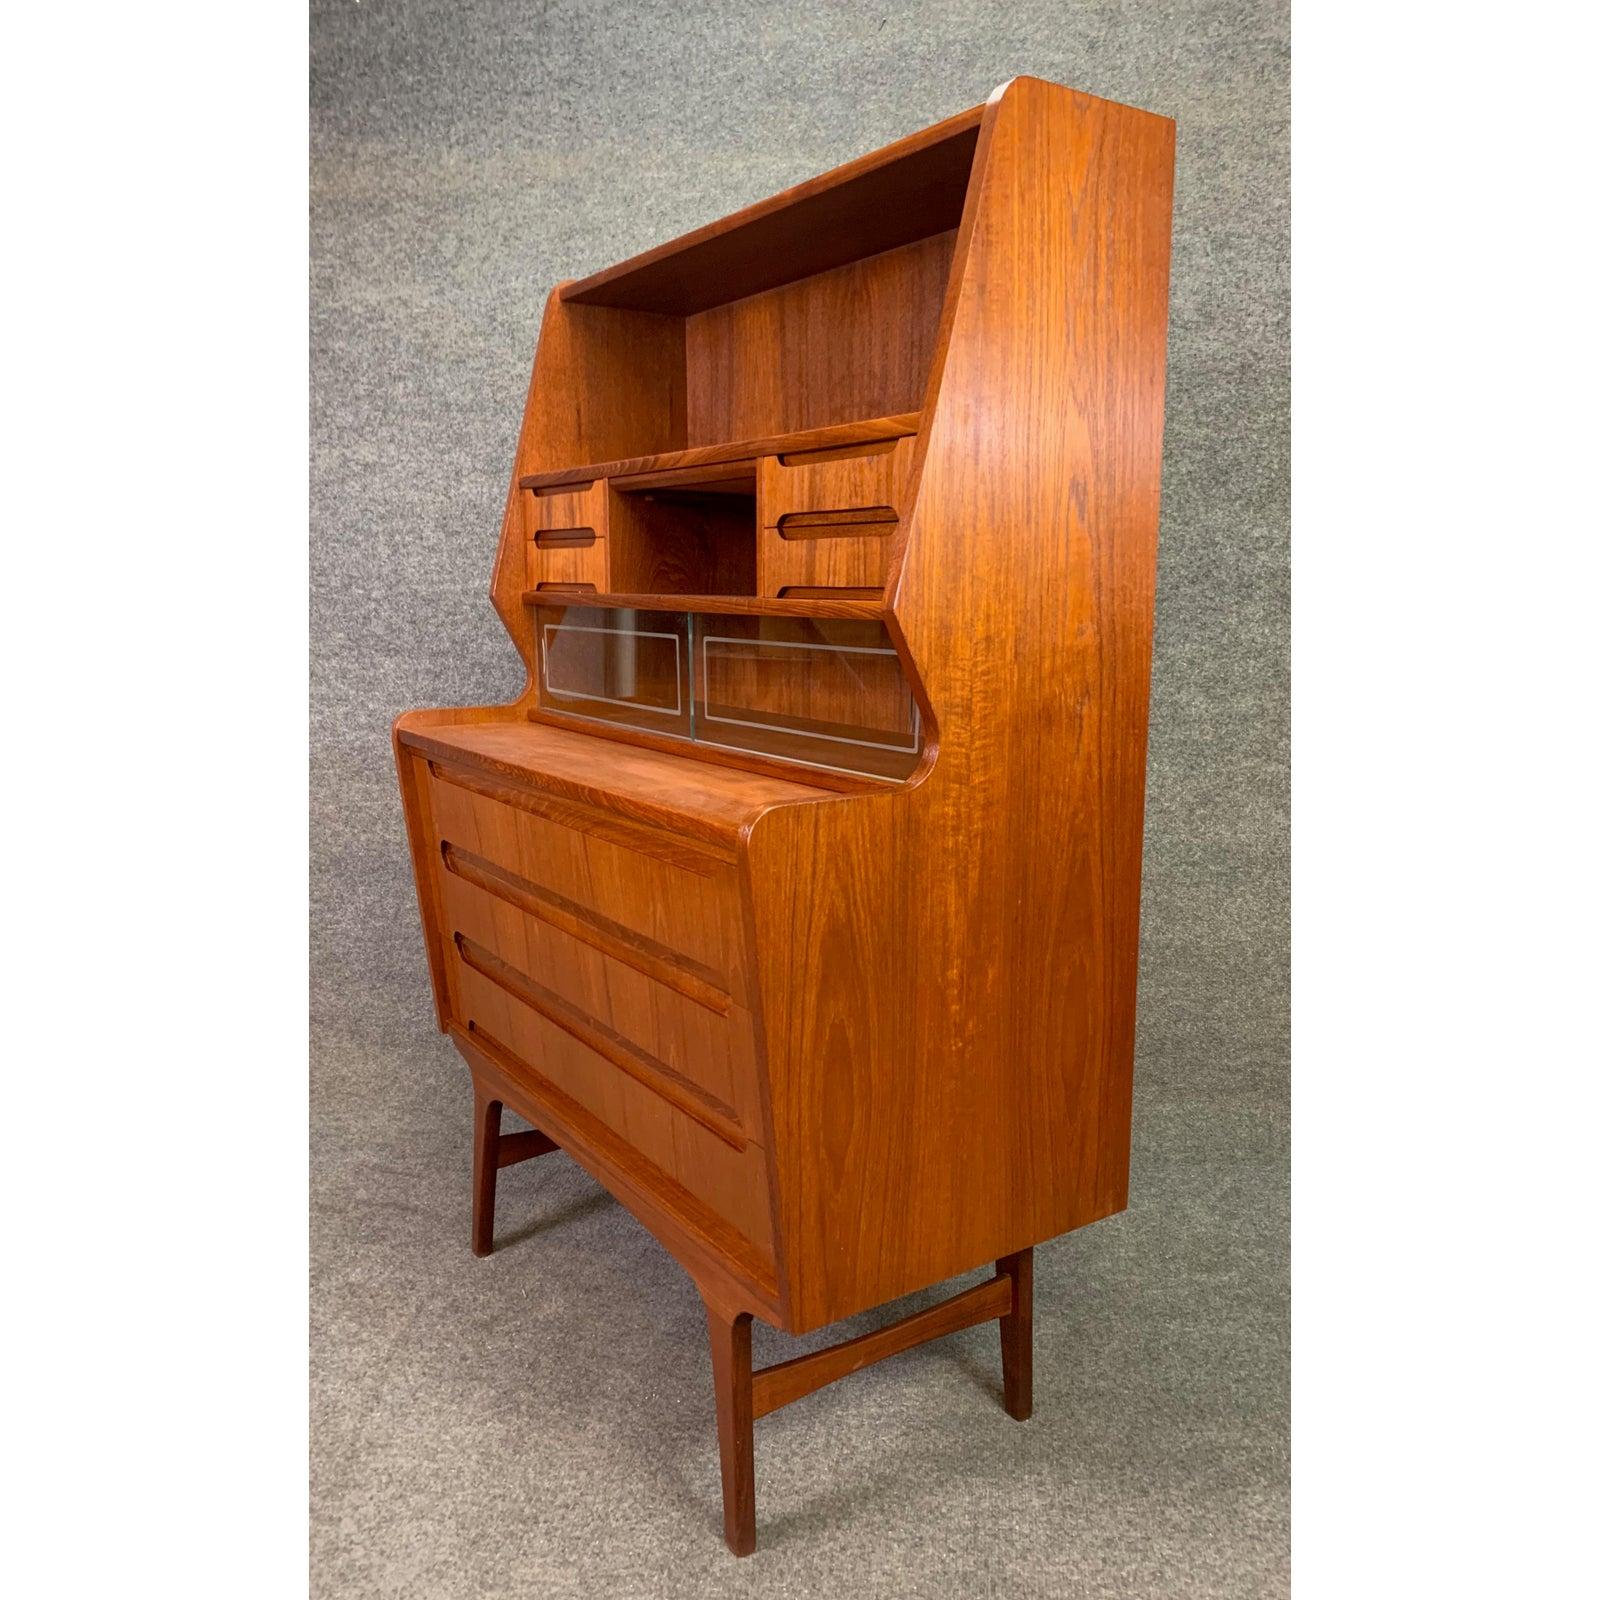 Here is a versatile 1960s Scandinavian Modern teak secretary desk recently imported from Sweden to California before its restoration. This exquisite storage piece, with its vibrant teak wood grain, has a lot to offer:
On its upper part: A set of